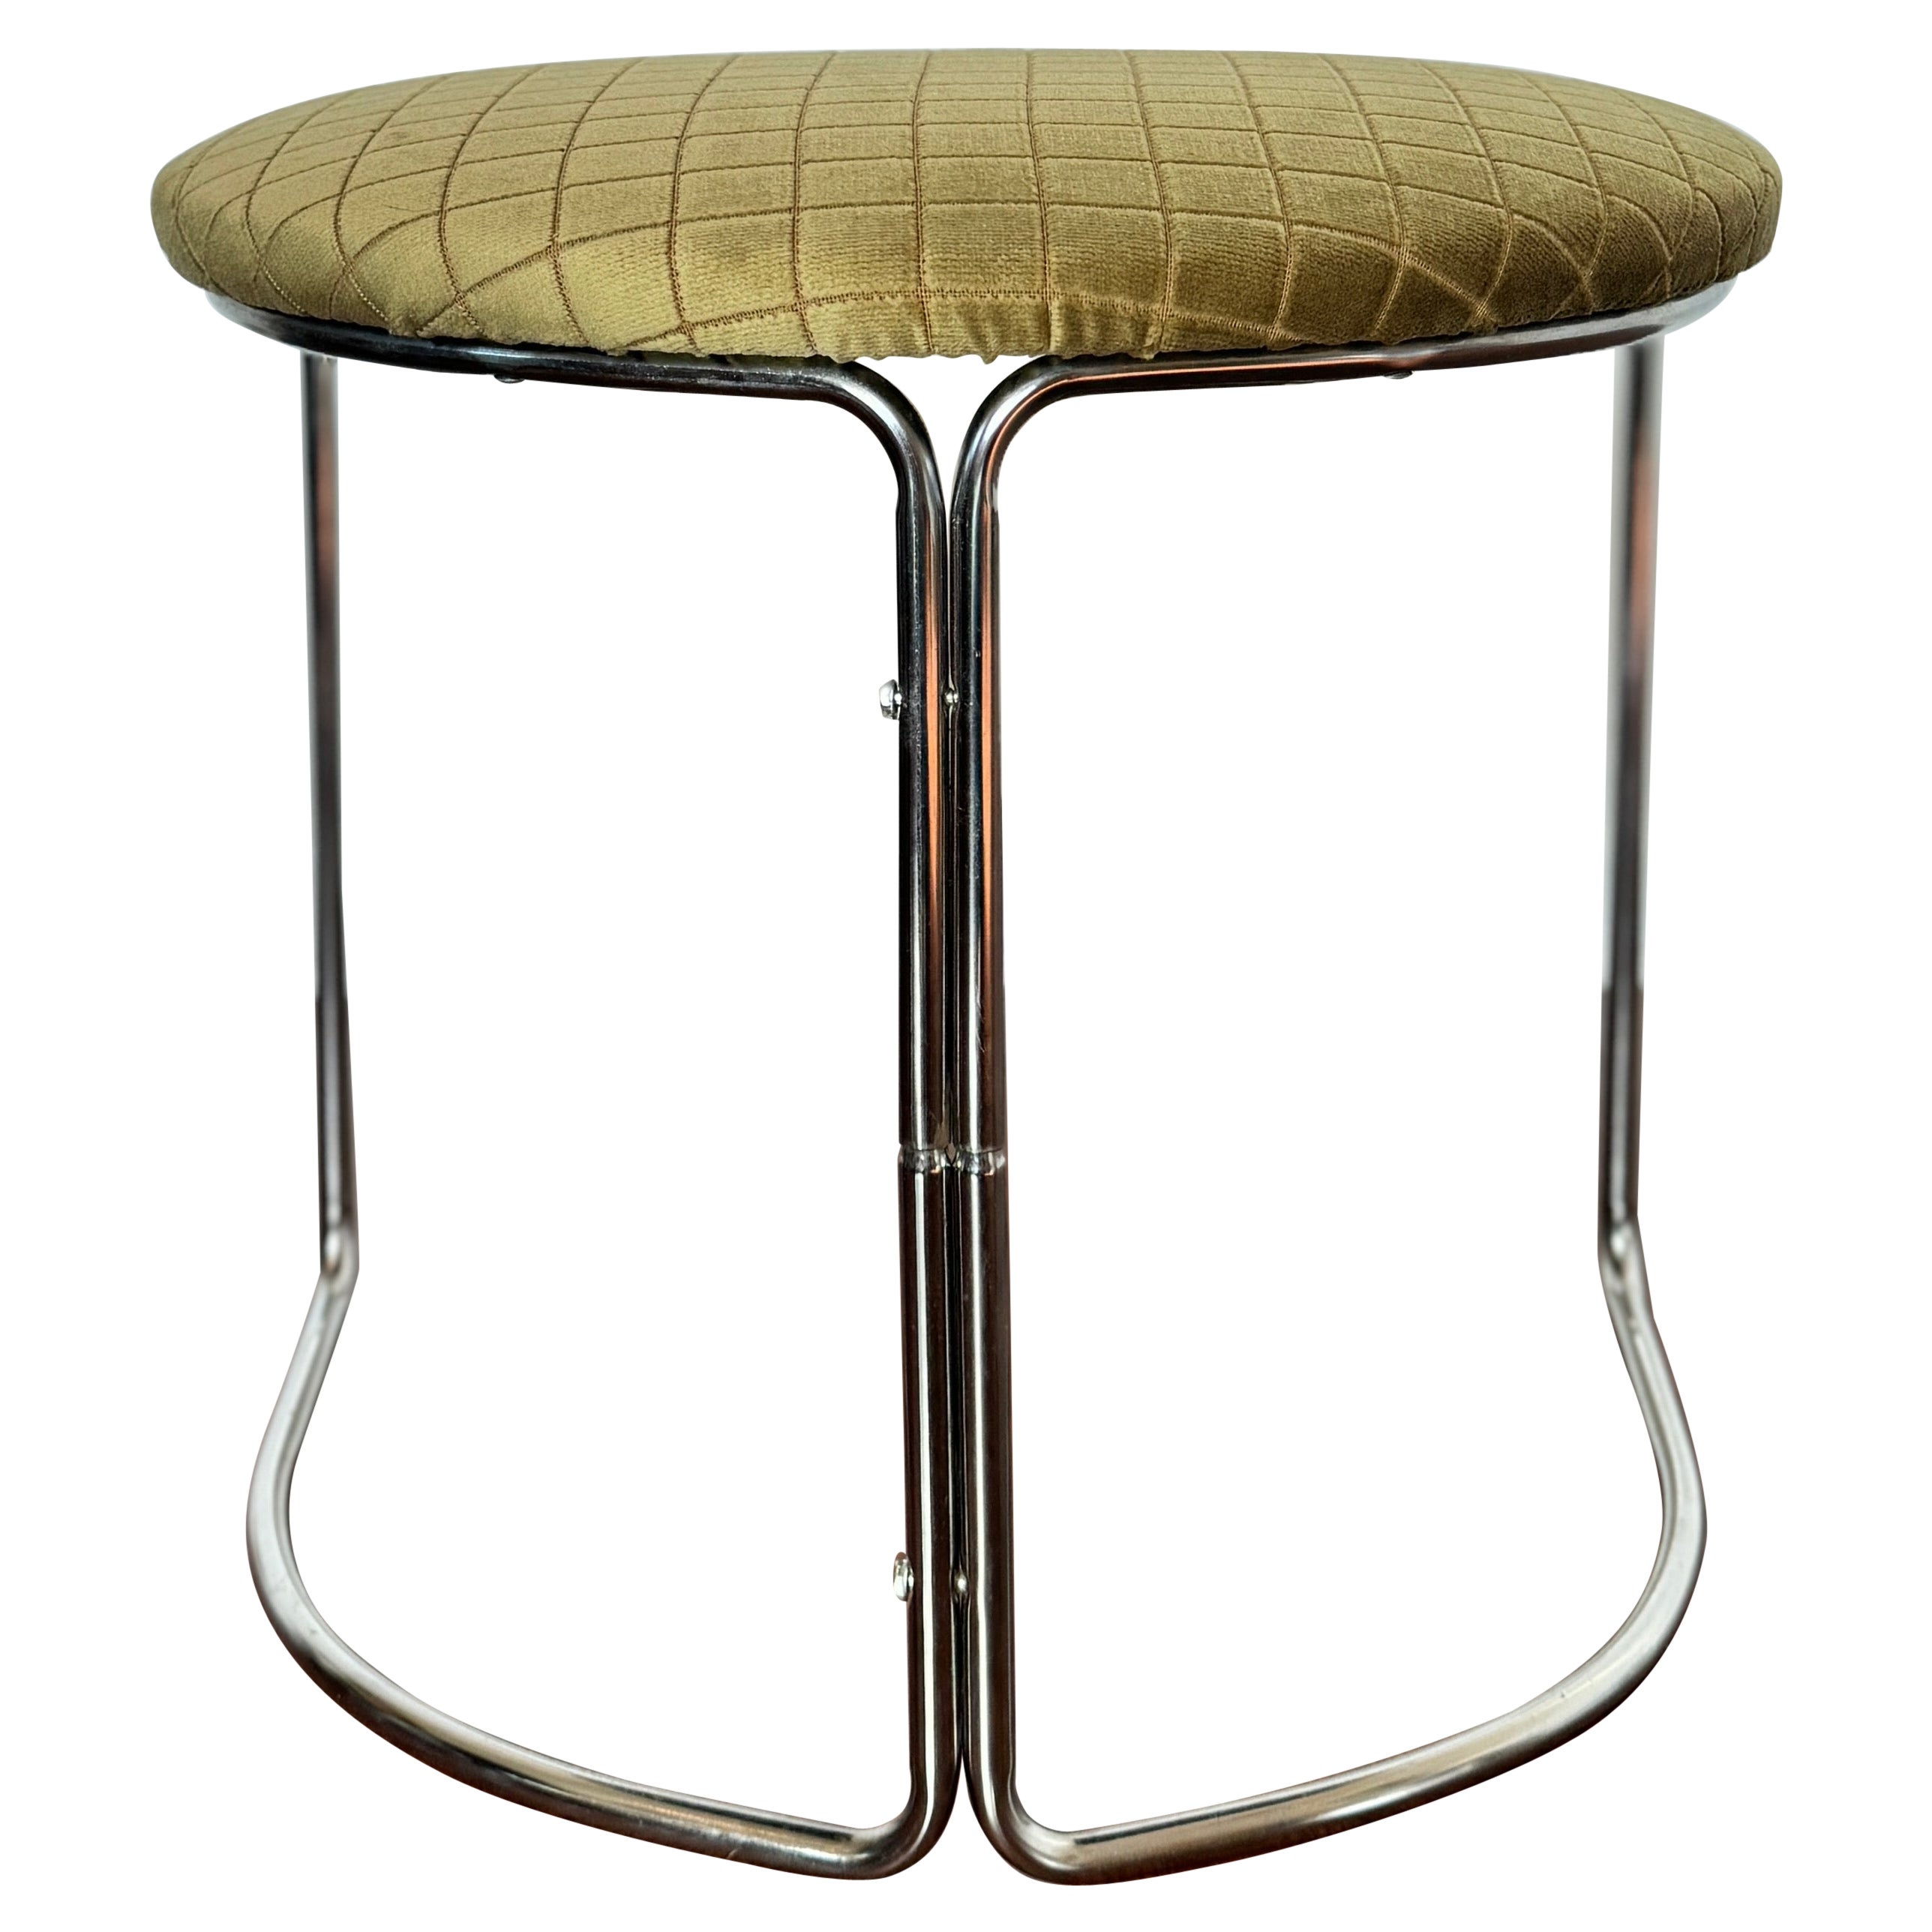 Space age stool by Cisco circa 1970s. Reupholstered in 100% cotton check velvet  For Sale